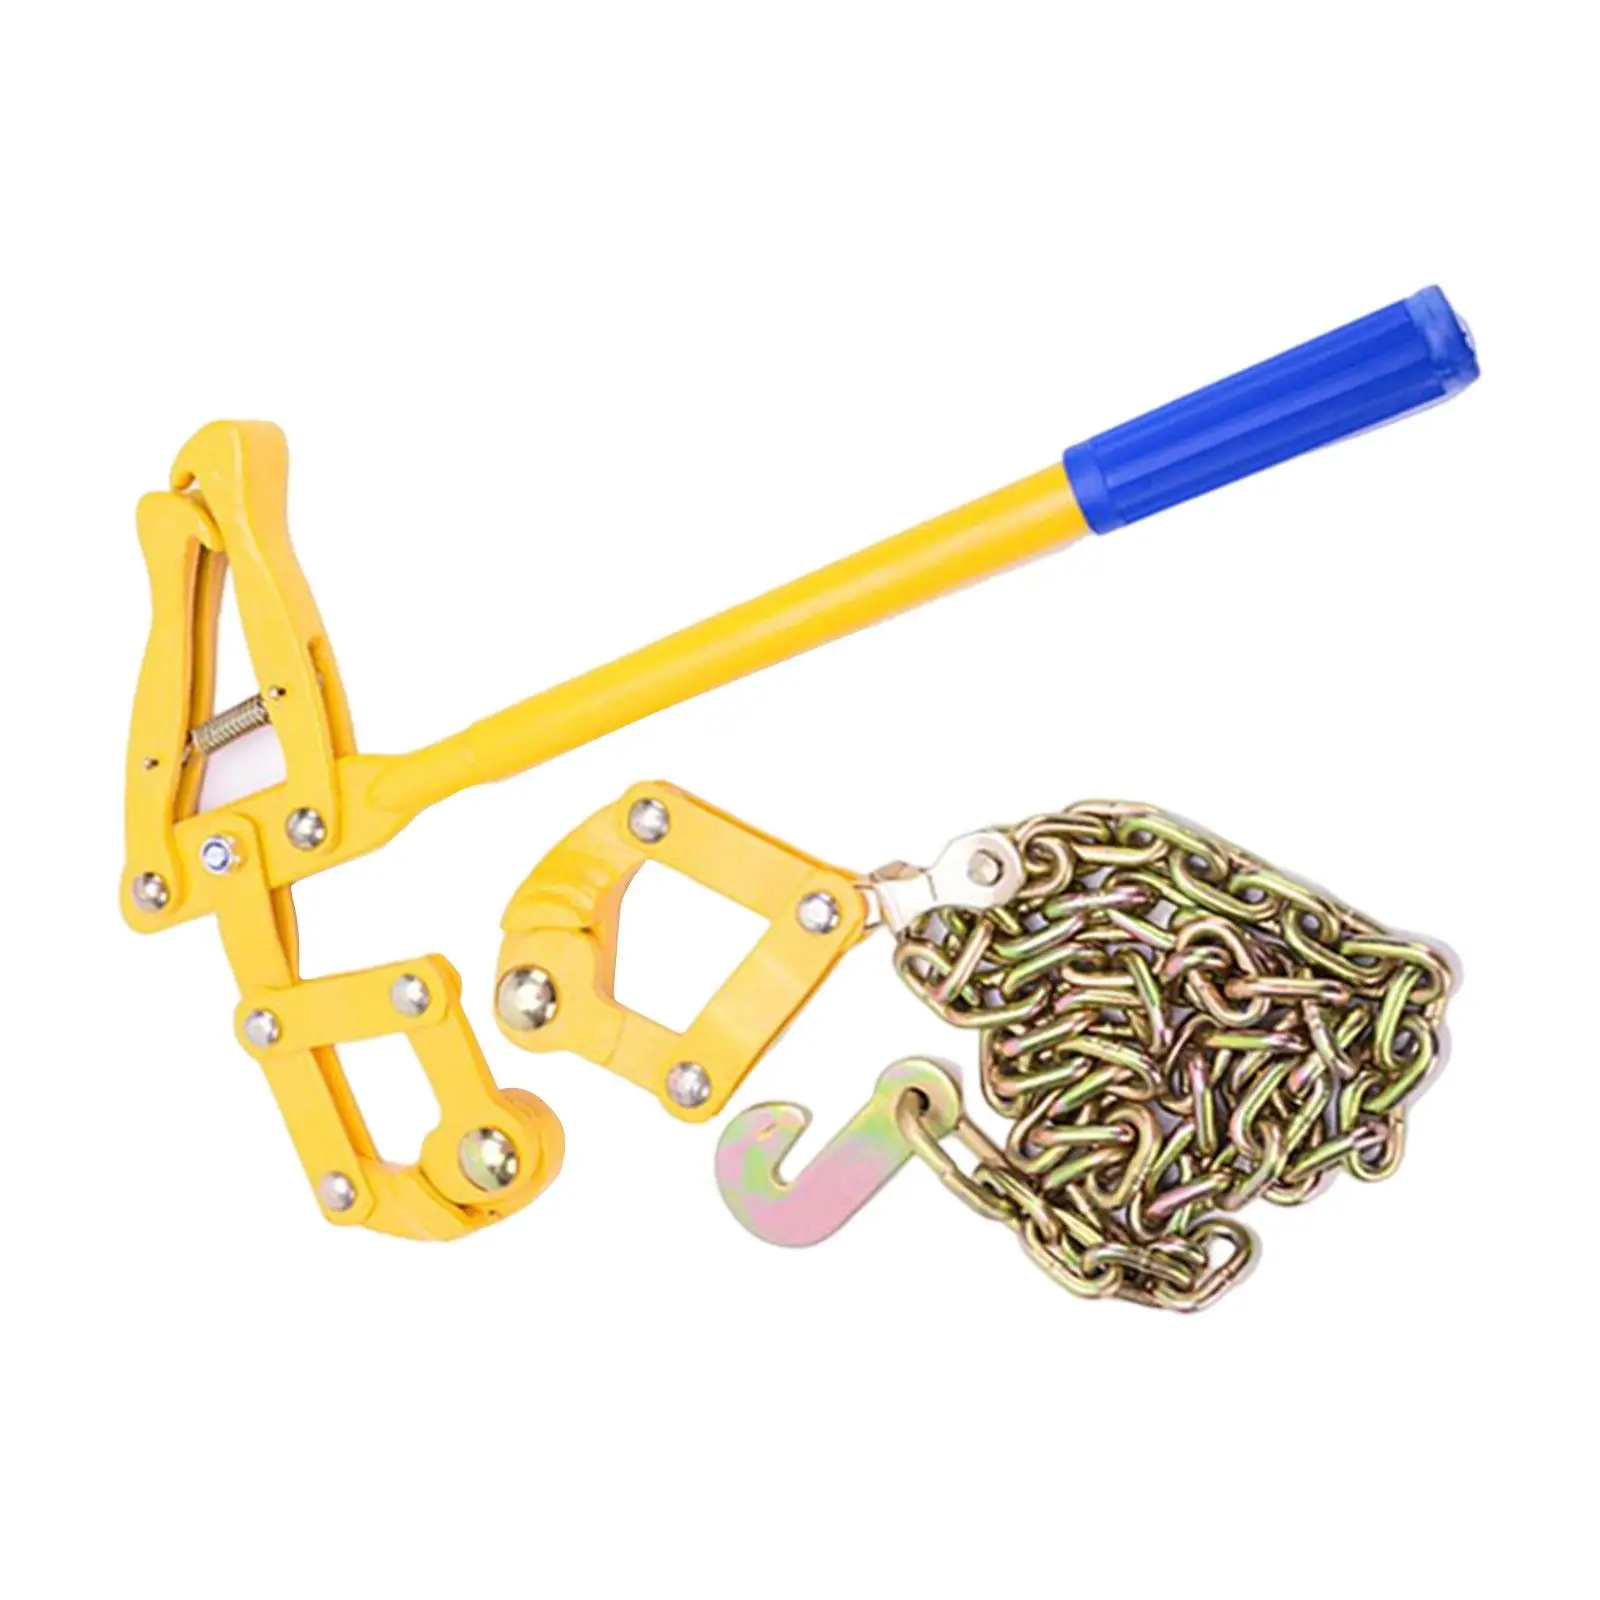 Heavy Duty Chain Fence Strainer Fence Puller Repair Tool Fence Plain Barbed Wire Strainer for Farm Fencing Cattle Barn